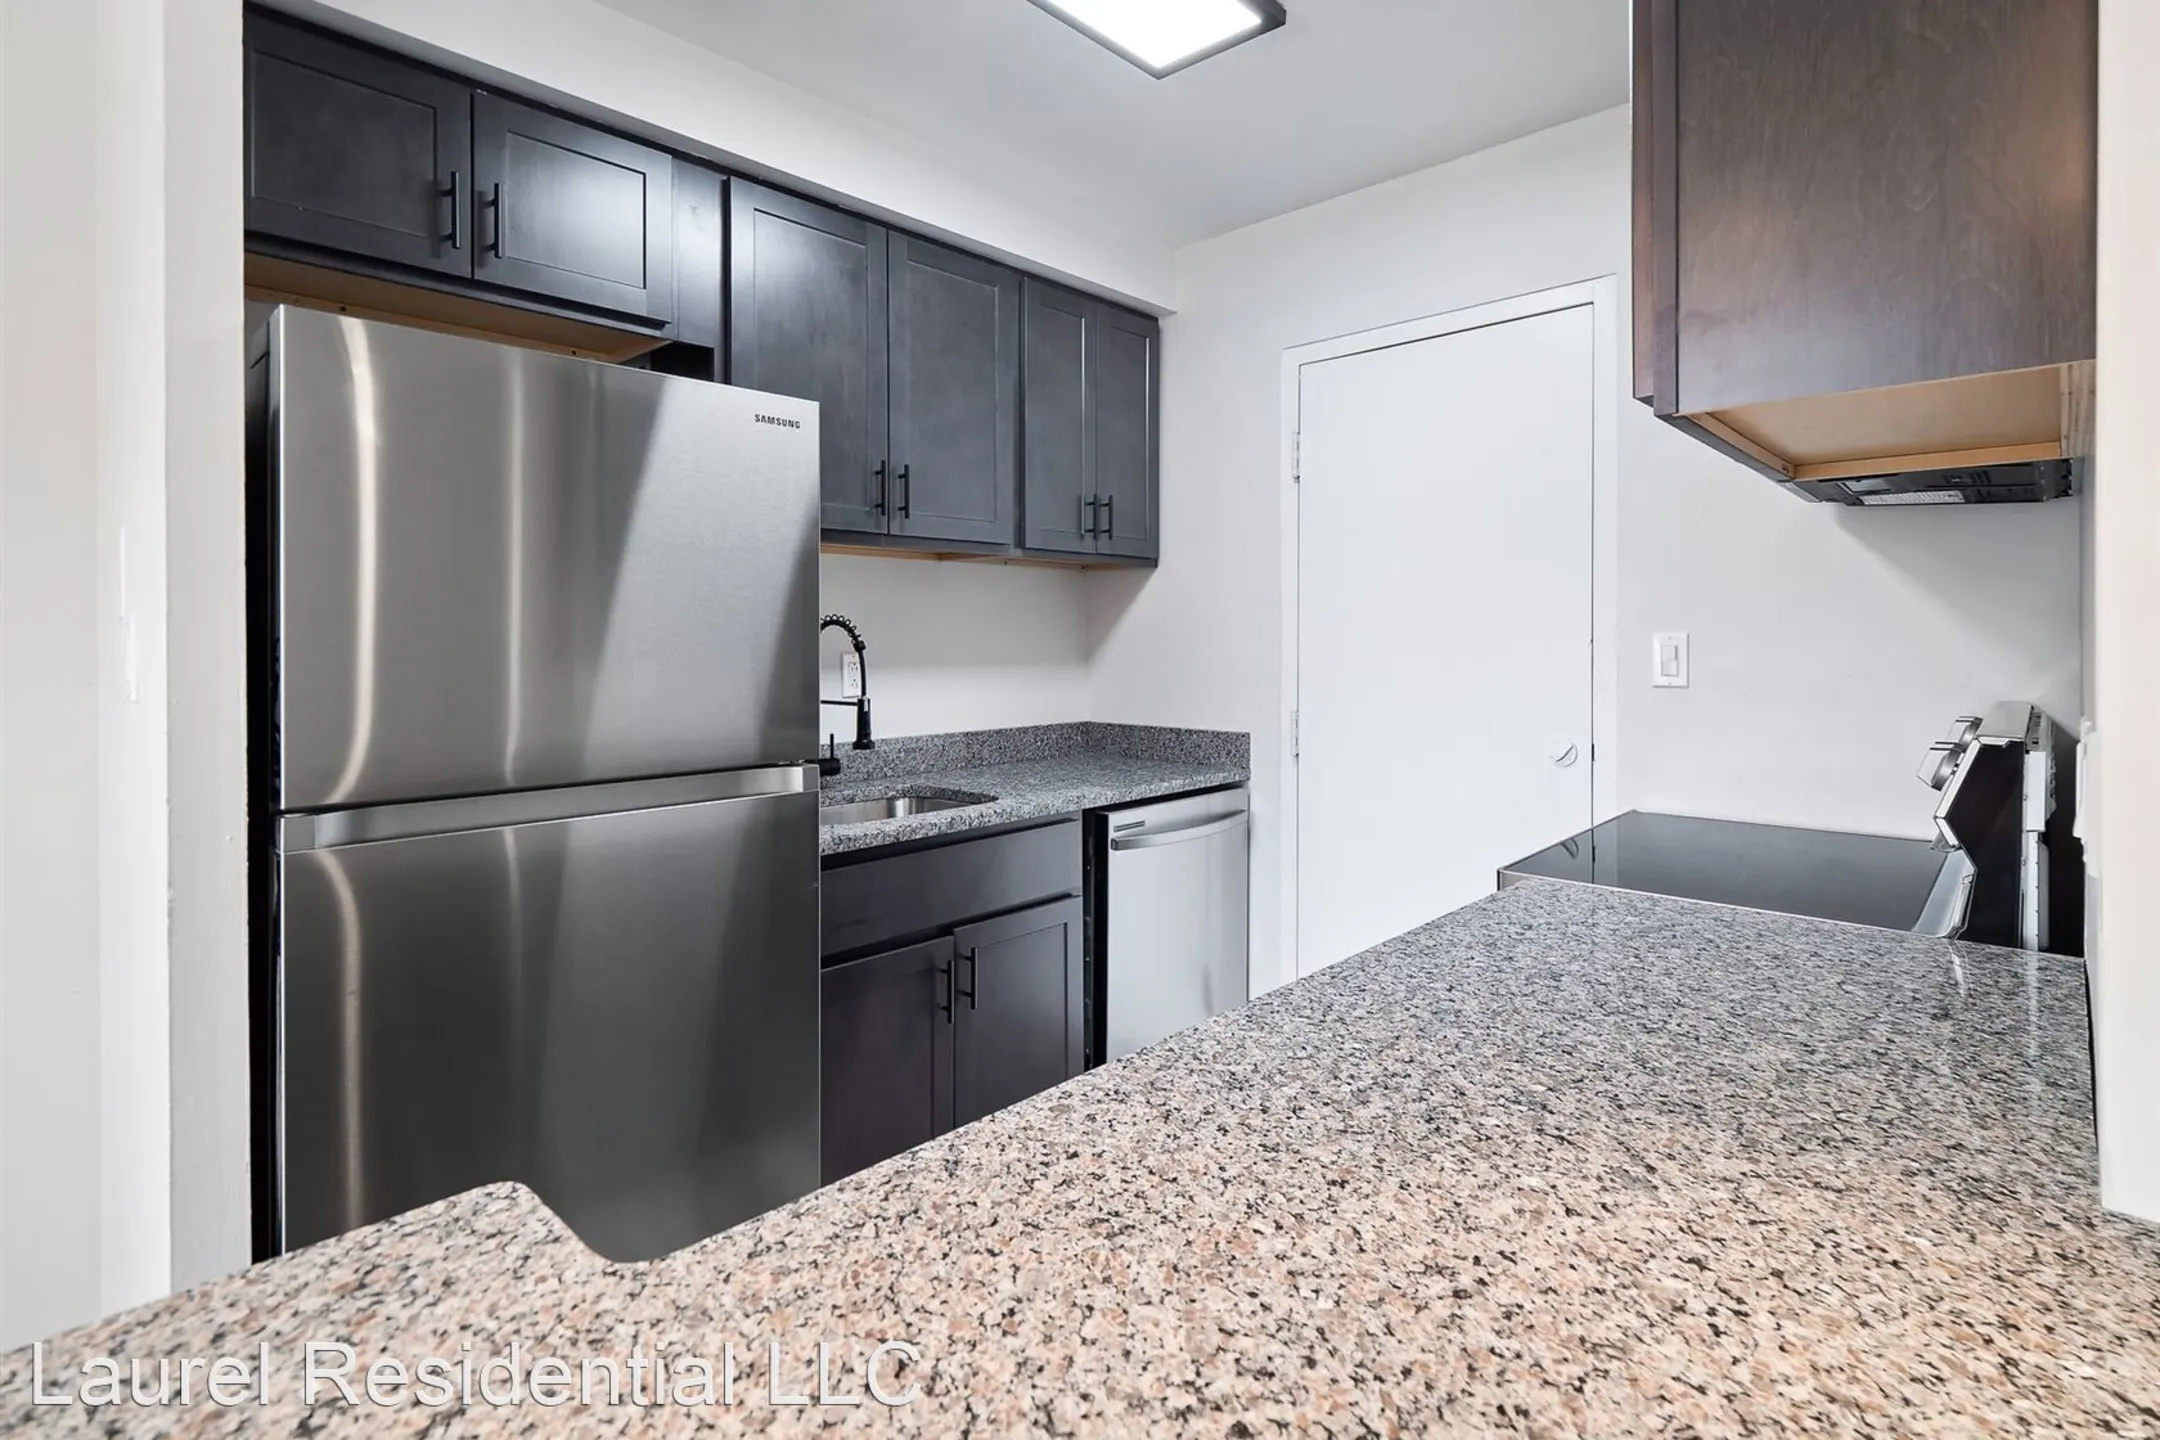 Kitchen - Coventry Mayfield Apartments - Cleveland Heights, OH